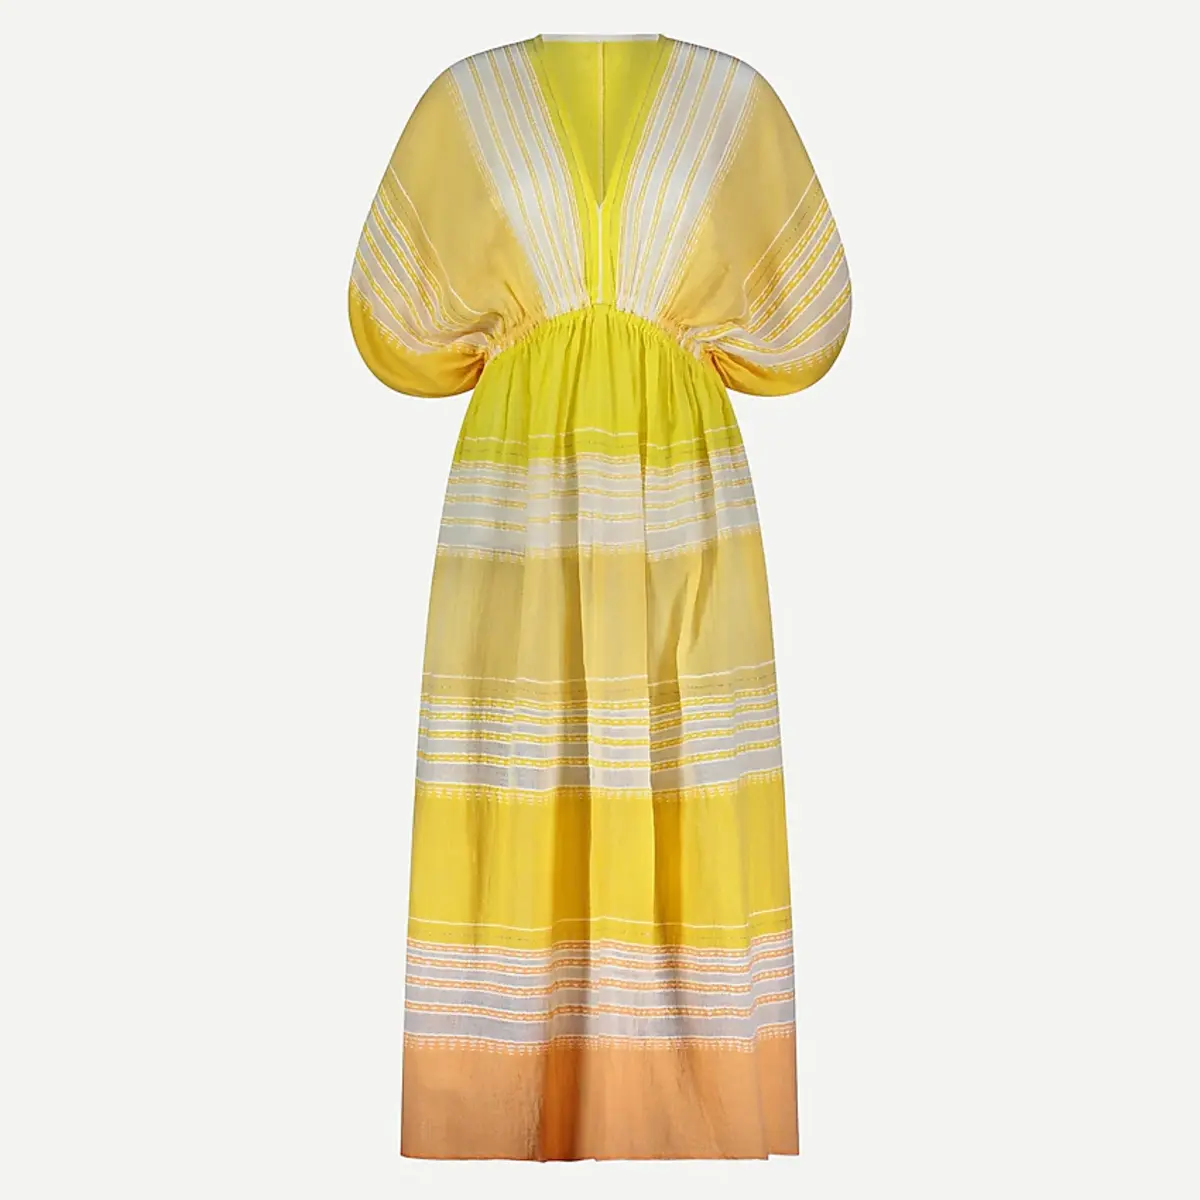 Go for a one-and-done piece with this J.Crew pale yellow and peach maxi dress.